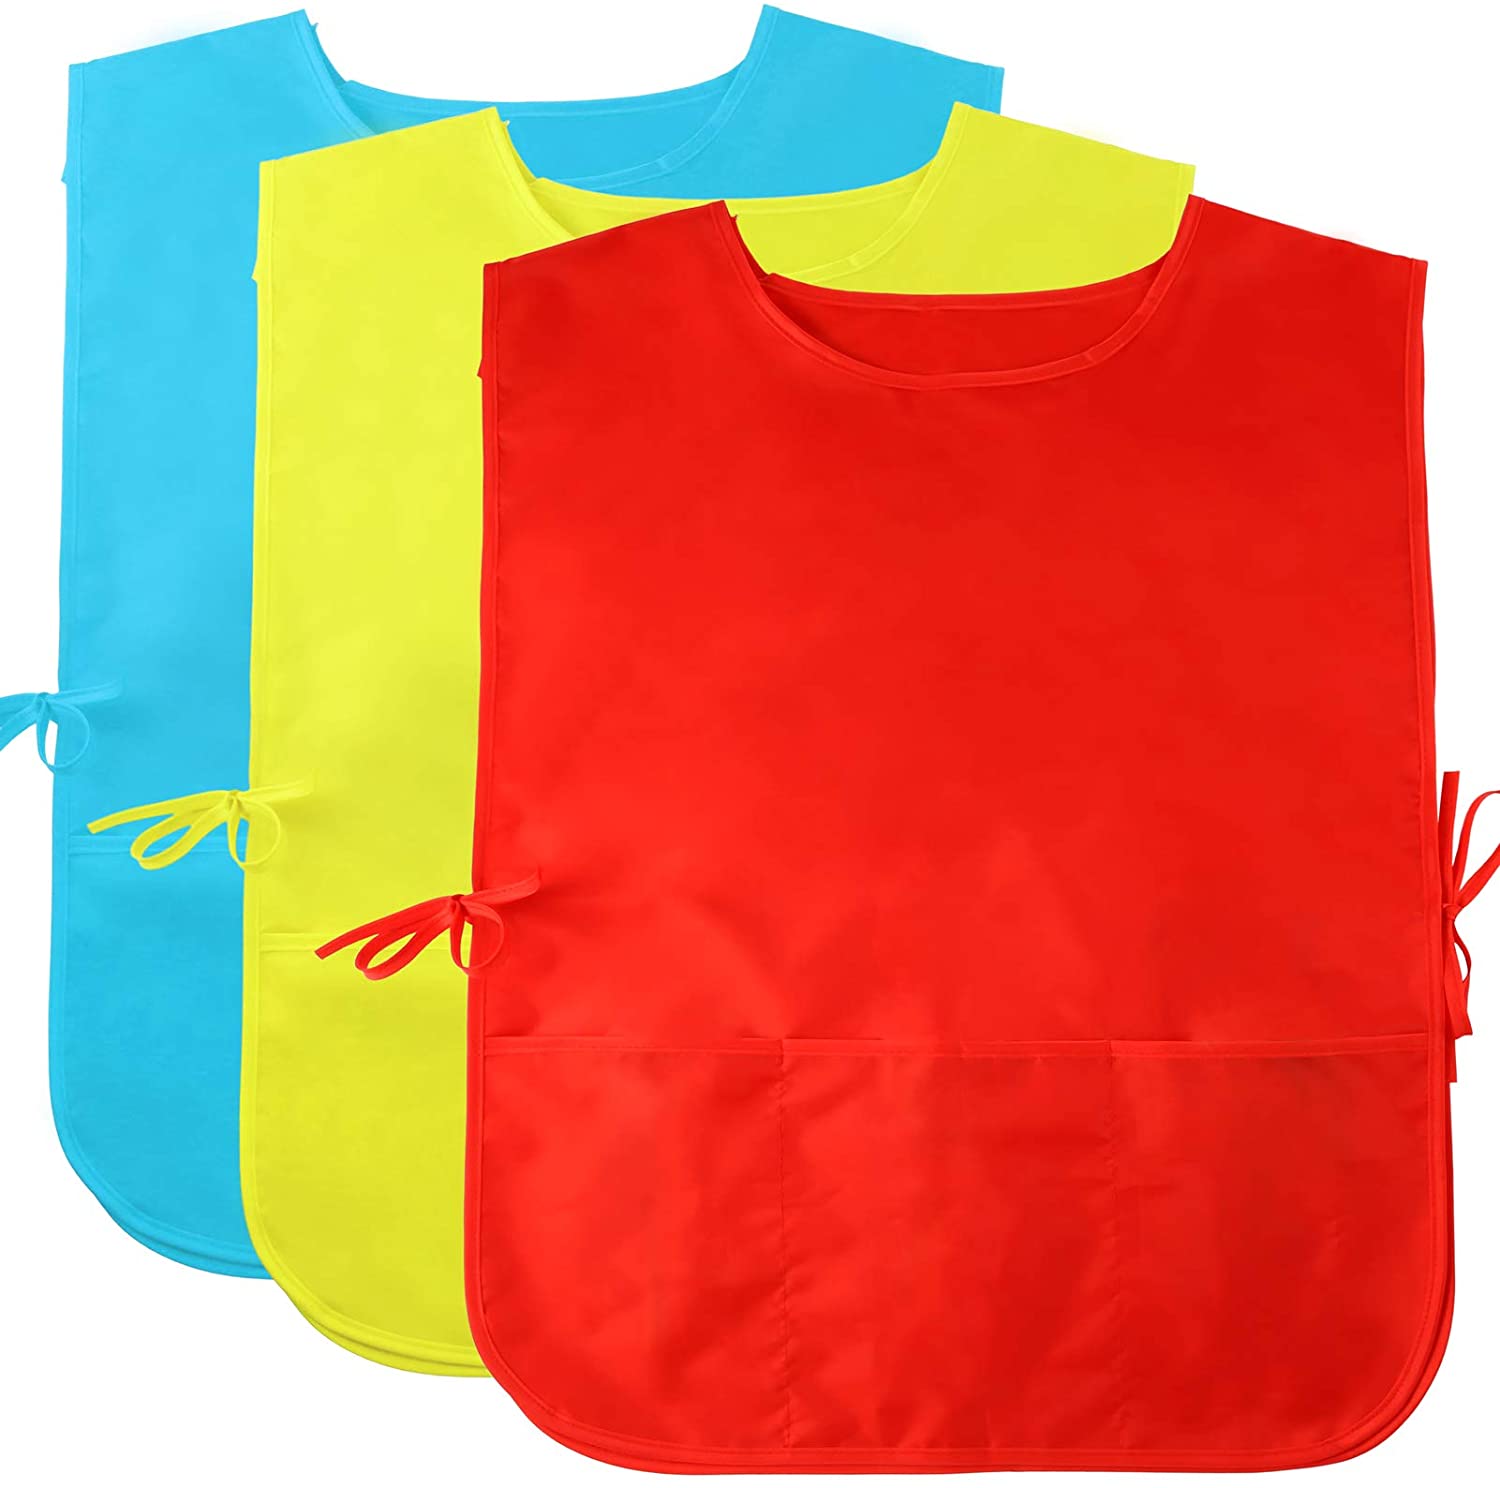 Kids Apron for Painting Children Painting Apron Kids Play Apron Waterproof  Cooking Apron with Big Pockets For Children Age 6+ 